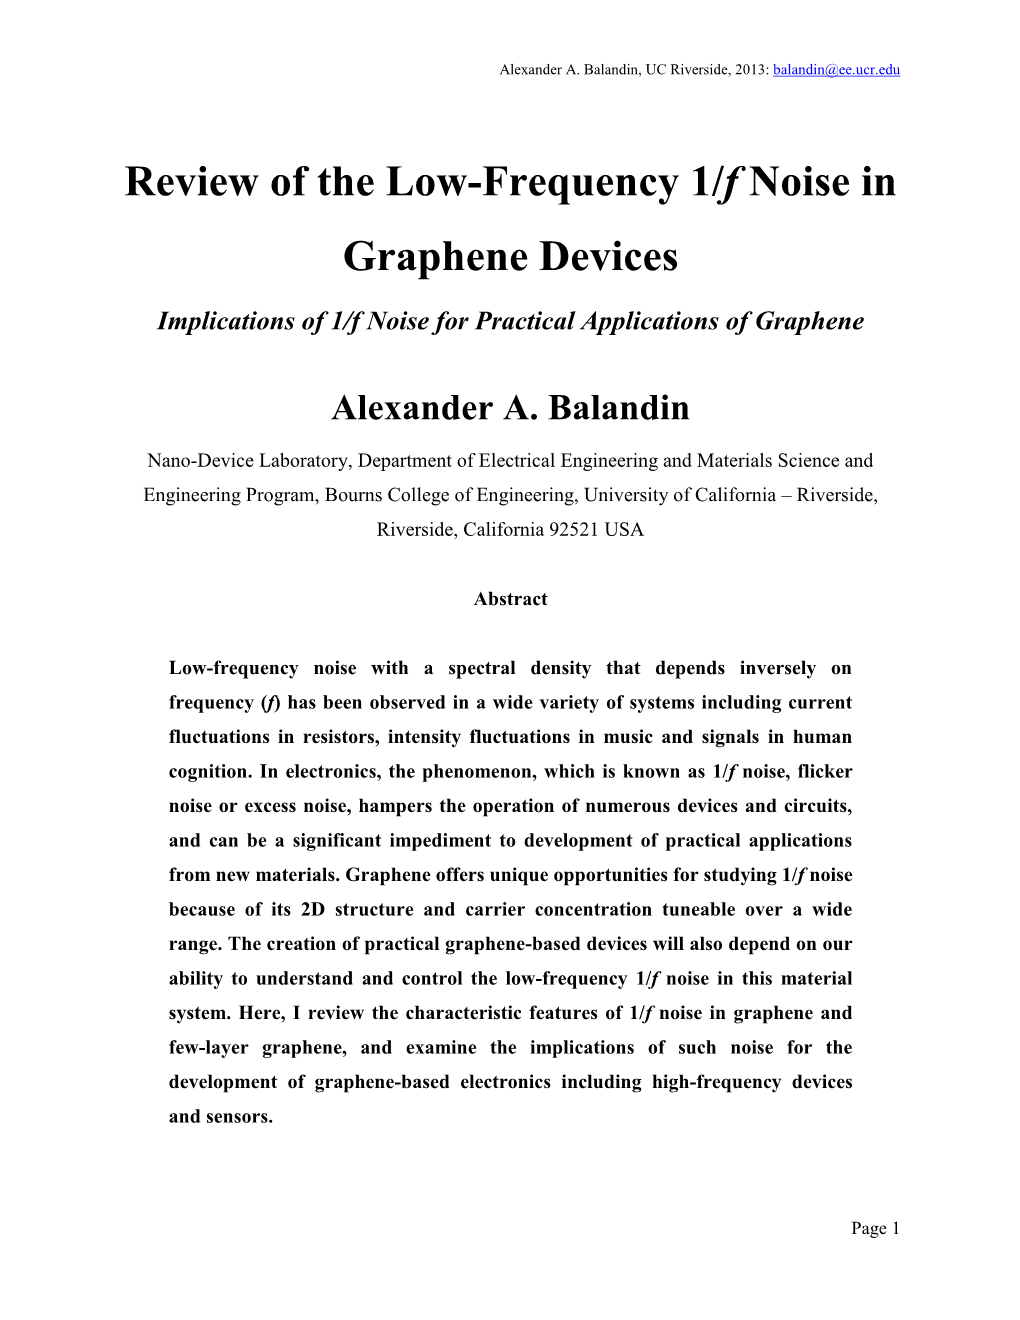 Review of the Low-Frequency 1/F Noise in Graphene Devices